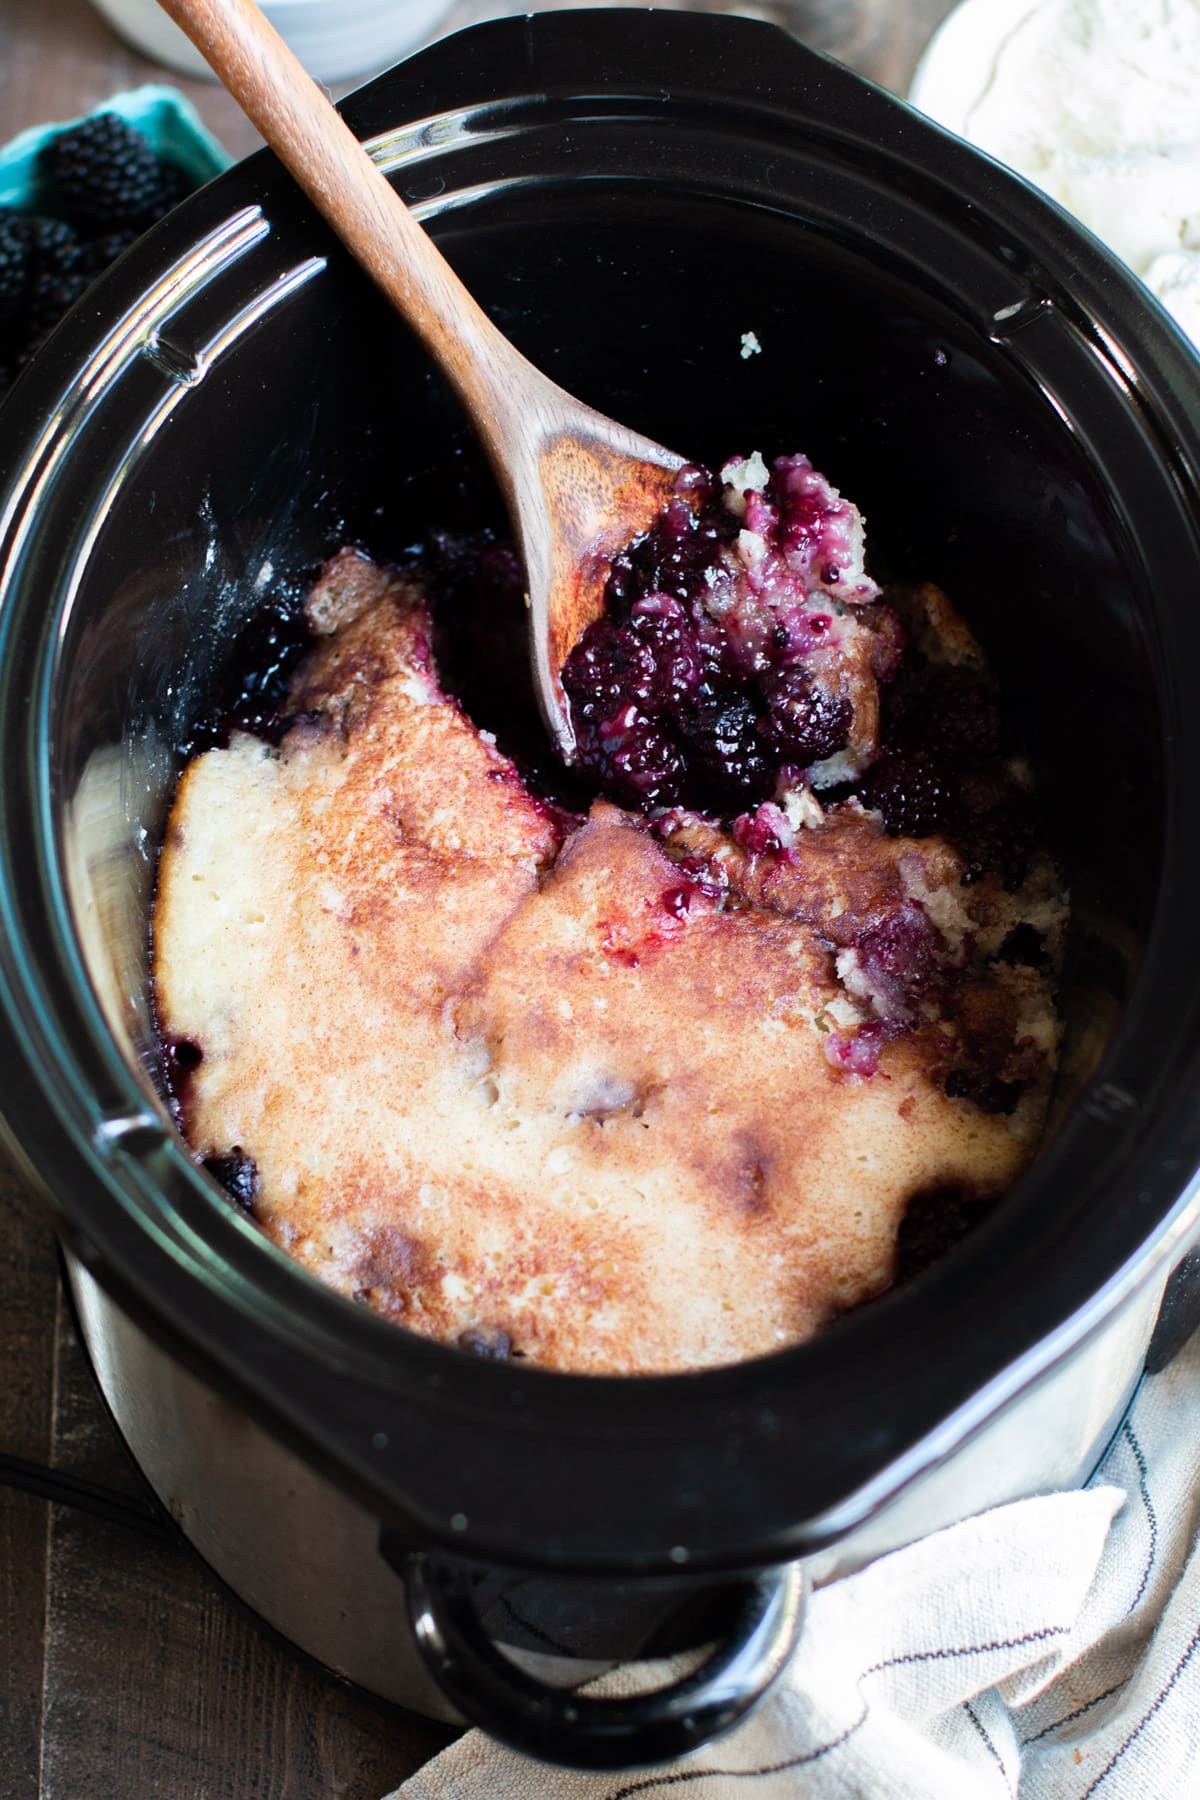 blackberry cobbler cooked in the slow cooker with spoon in it. Ice cream in the background.